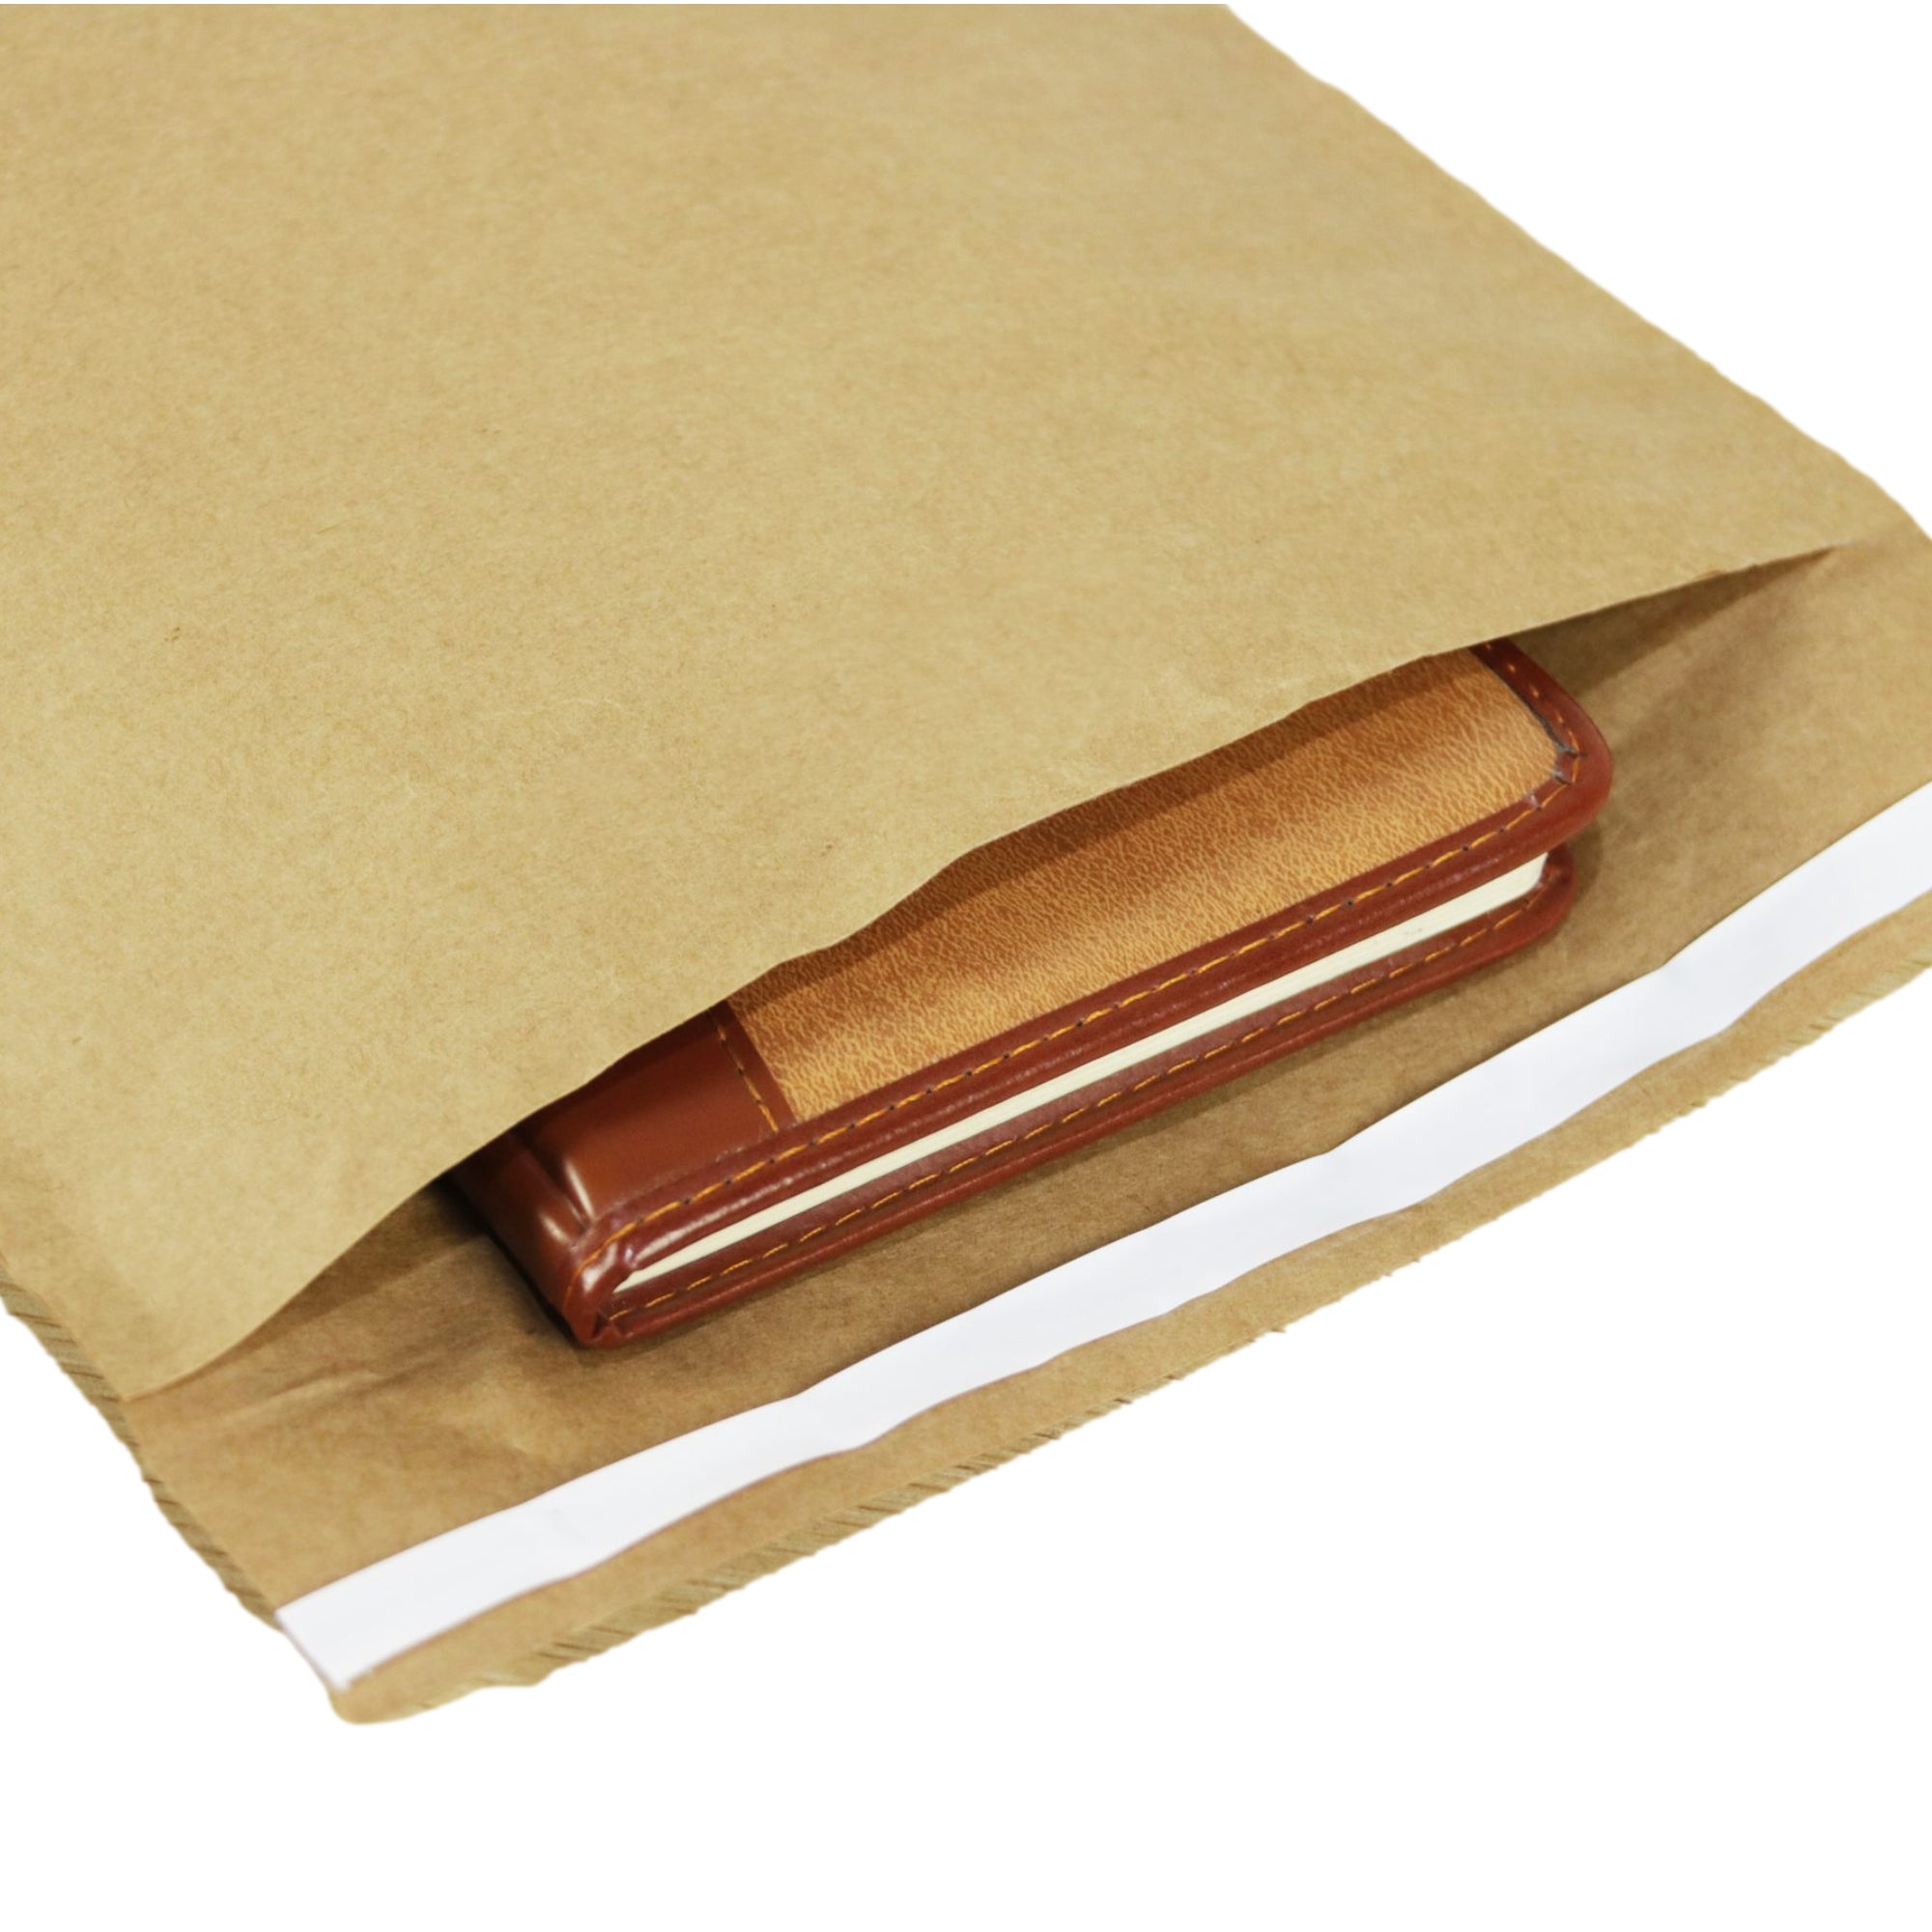 HoneyComb Padded Mailer 130mm x 250mm Kraft Paper Hex Wrap Protective Packaging [Bubble Mailer Alternative]